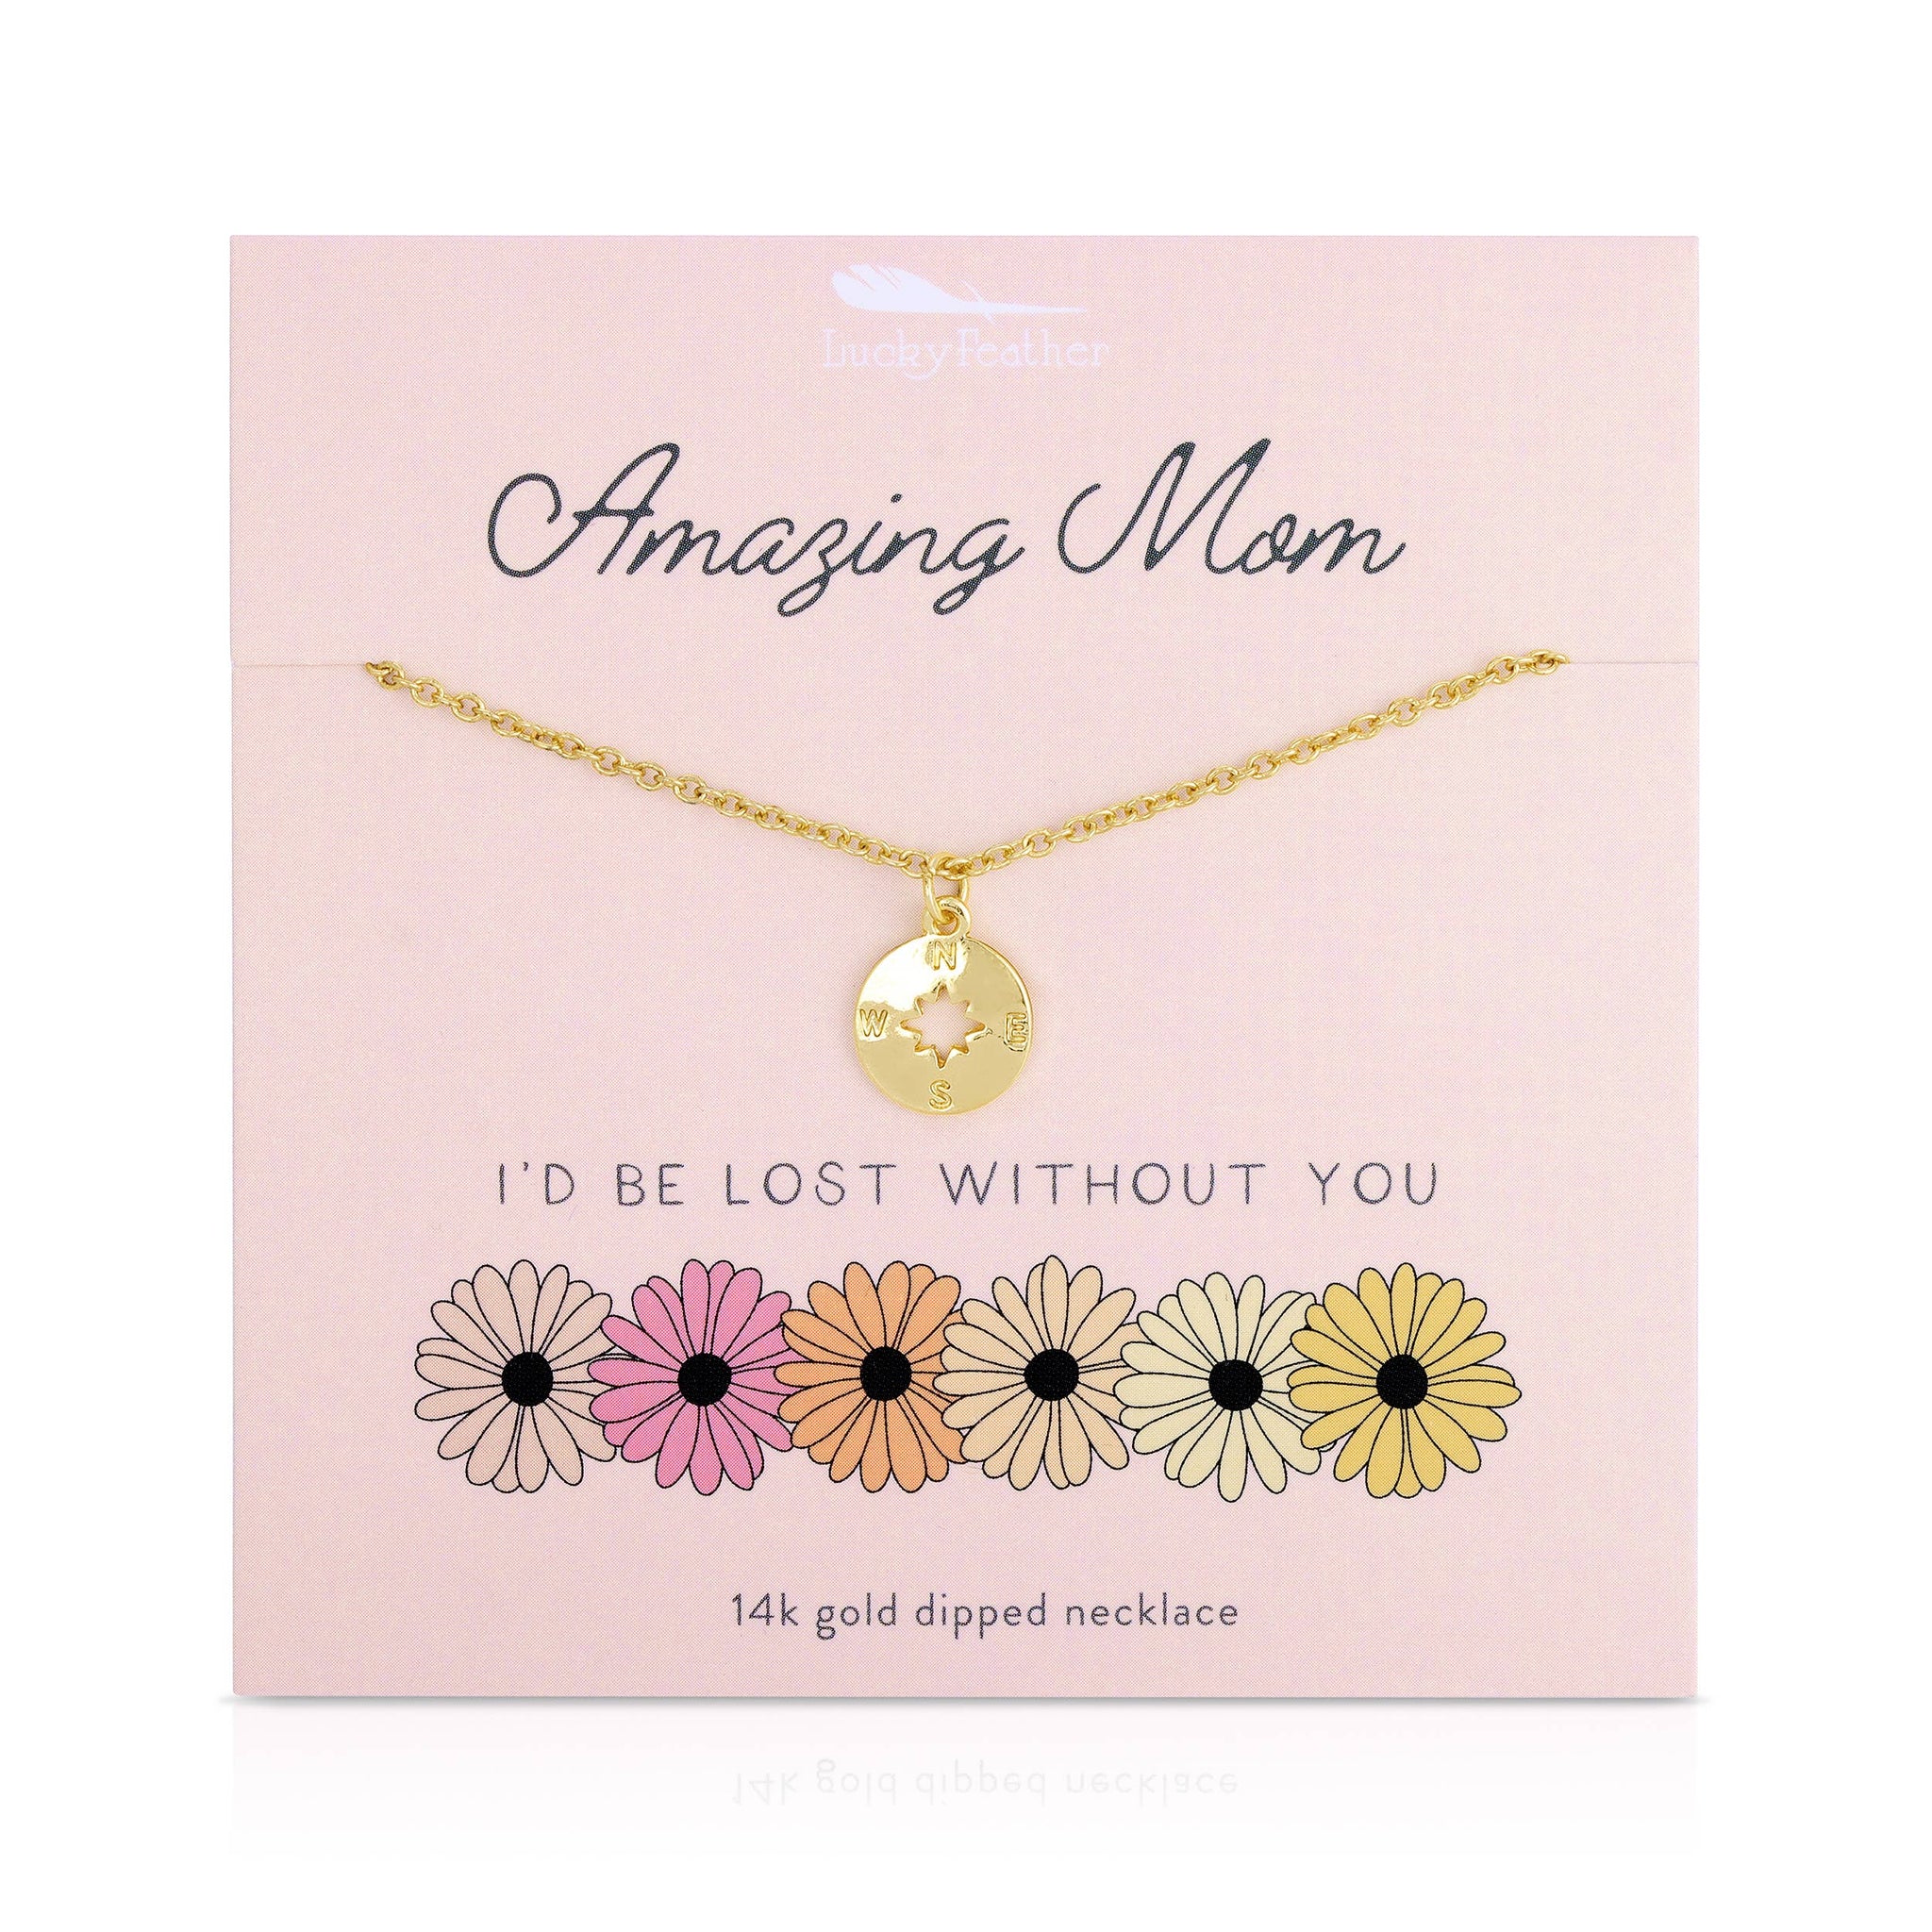 I’d be Lost Without You Mom Necklace